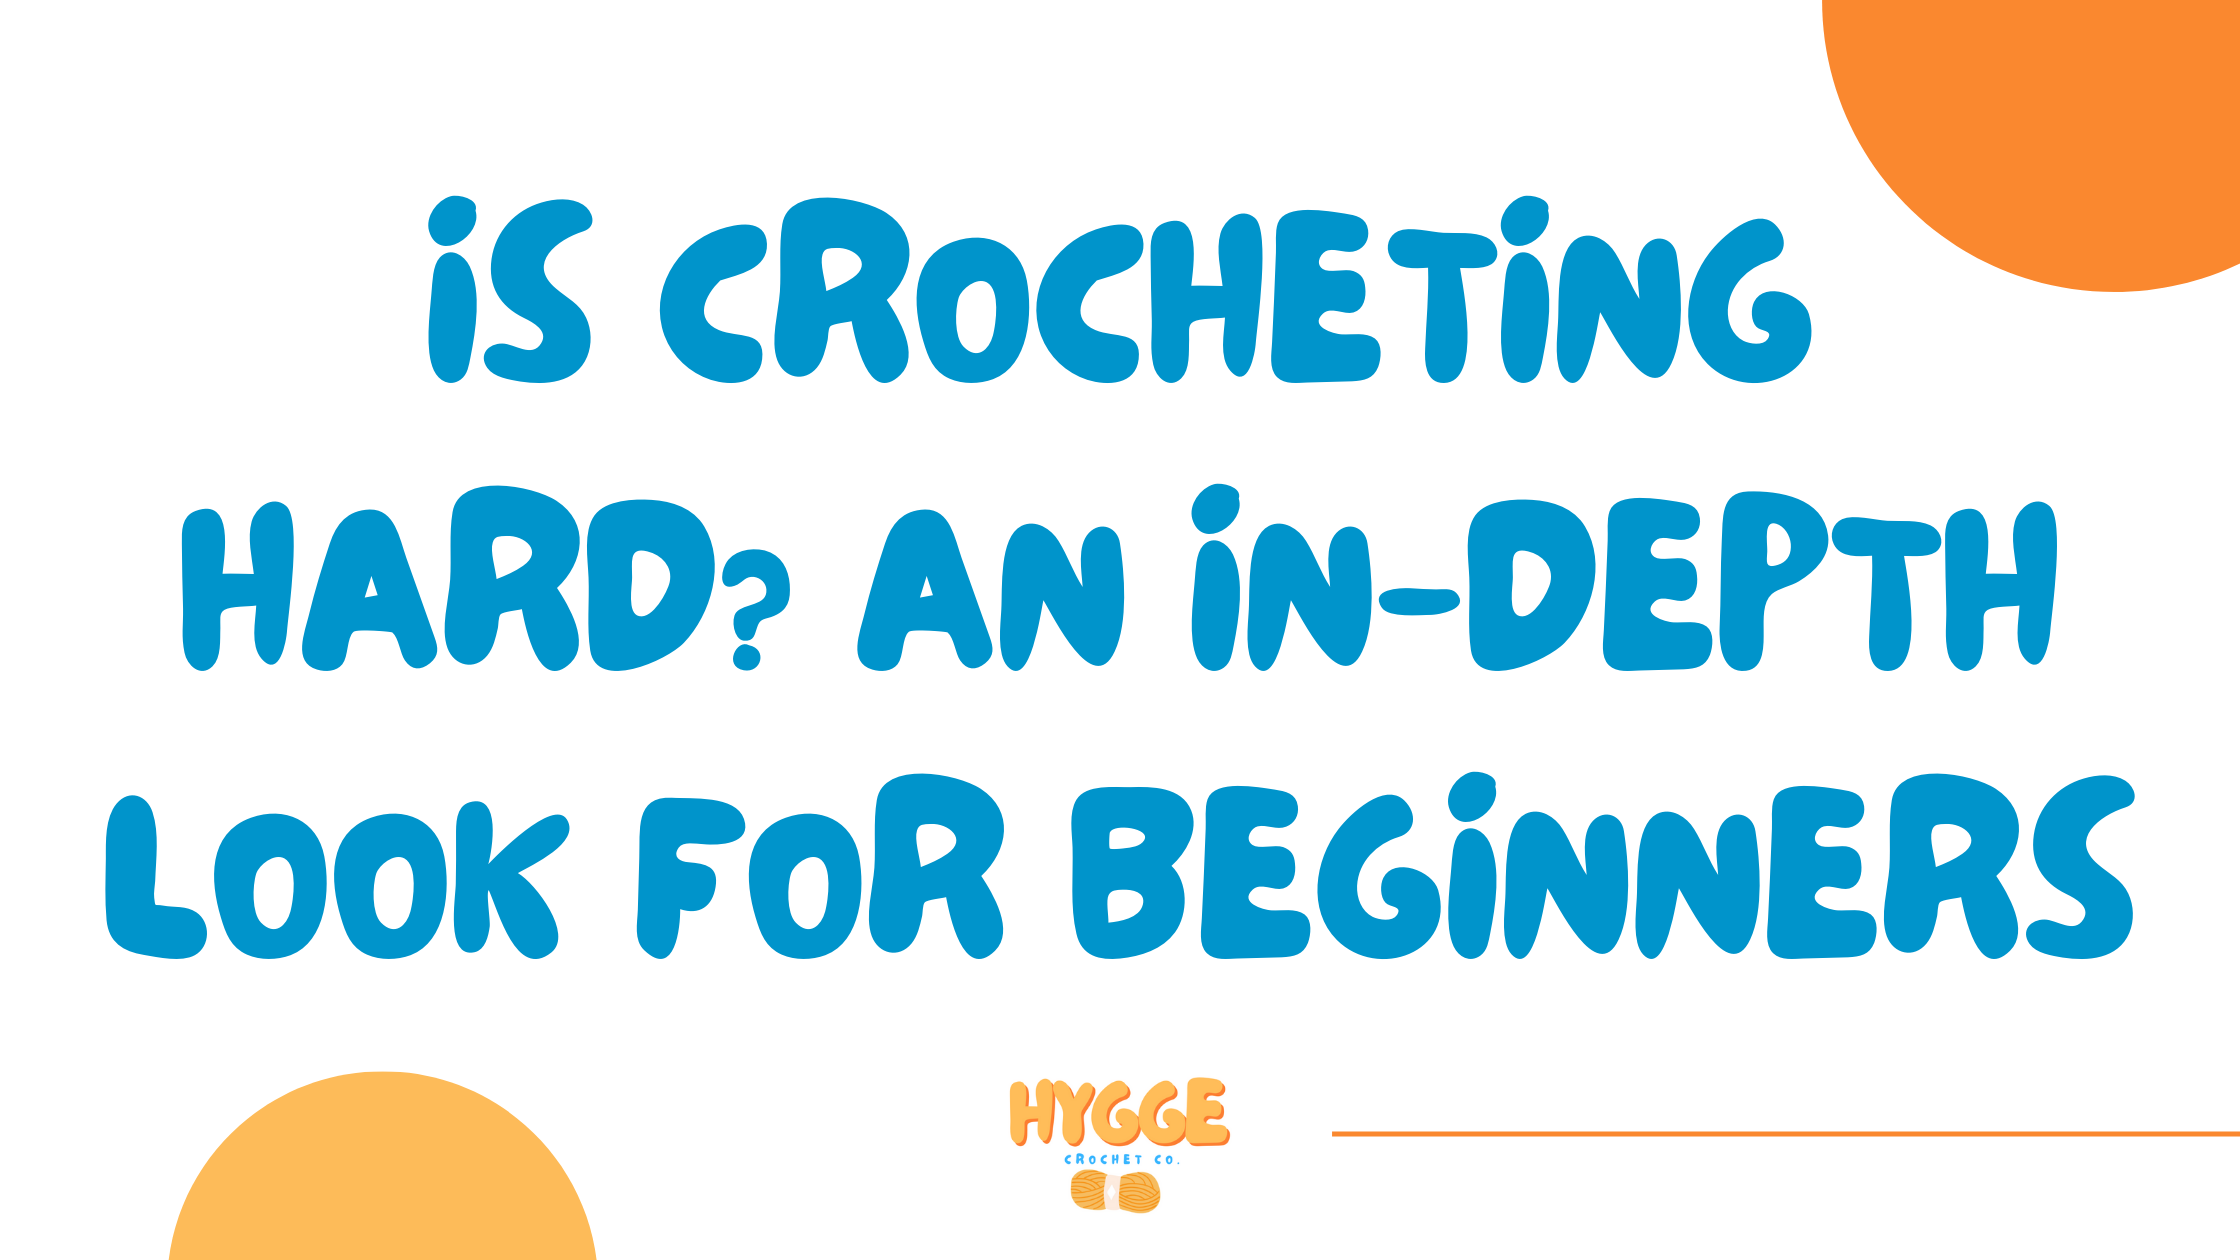 is crocheting hard? an in depth look for beginners